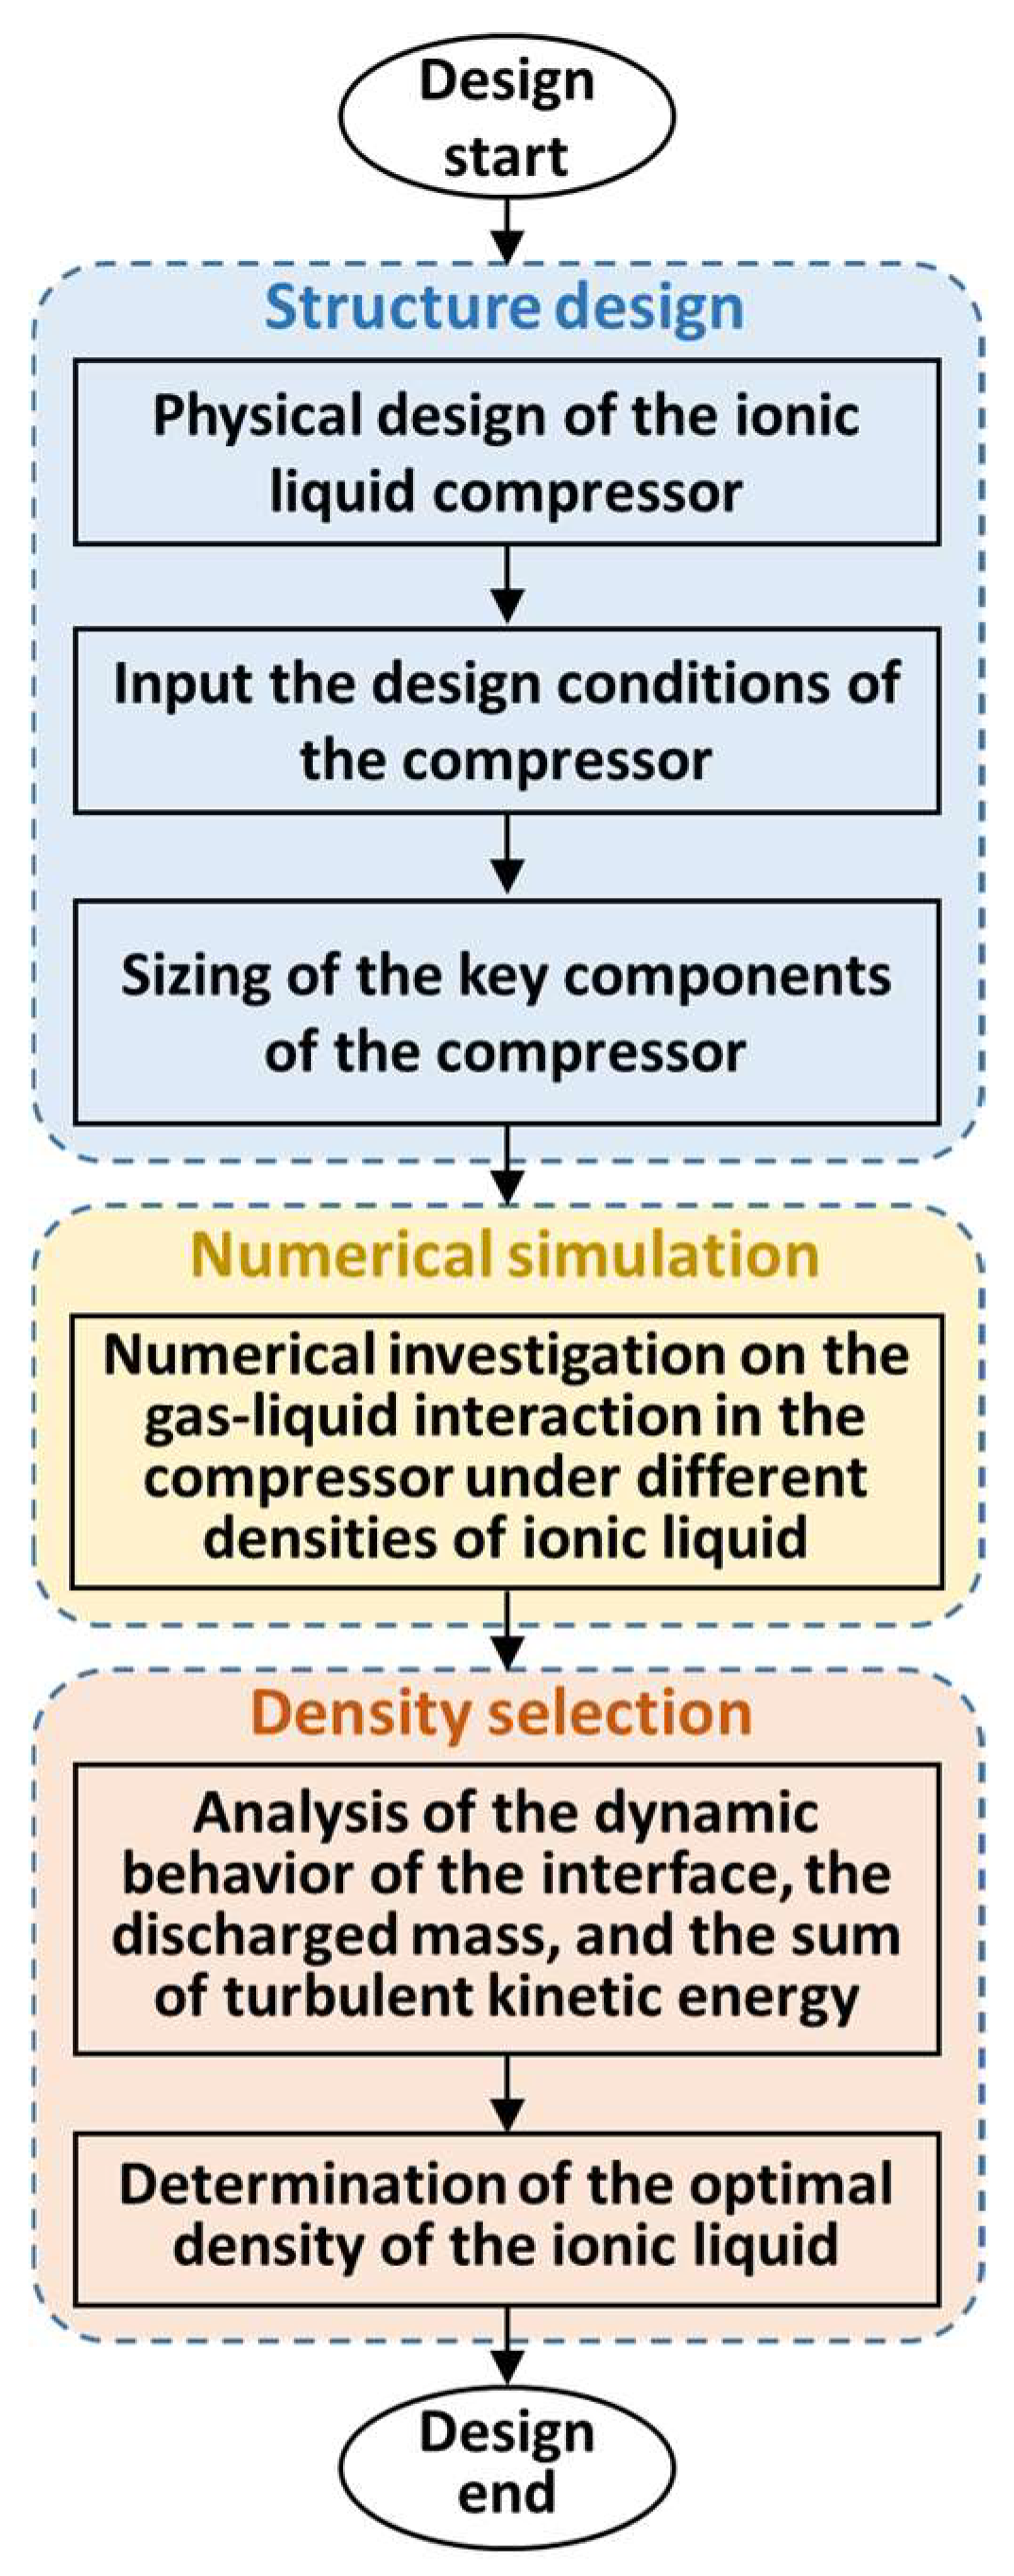 Energies | Free Full-Text | Effects of Liquid Density on the Gas-Liquid  Interaction of the Ionic Liquid Compressor for Hydrogen Storage